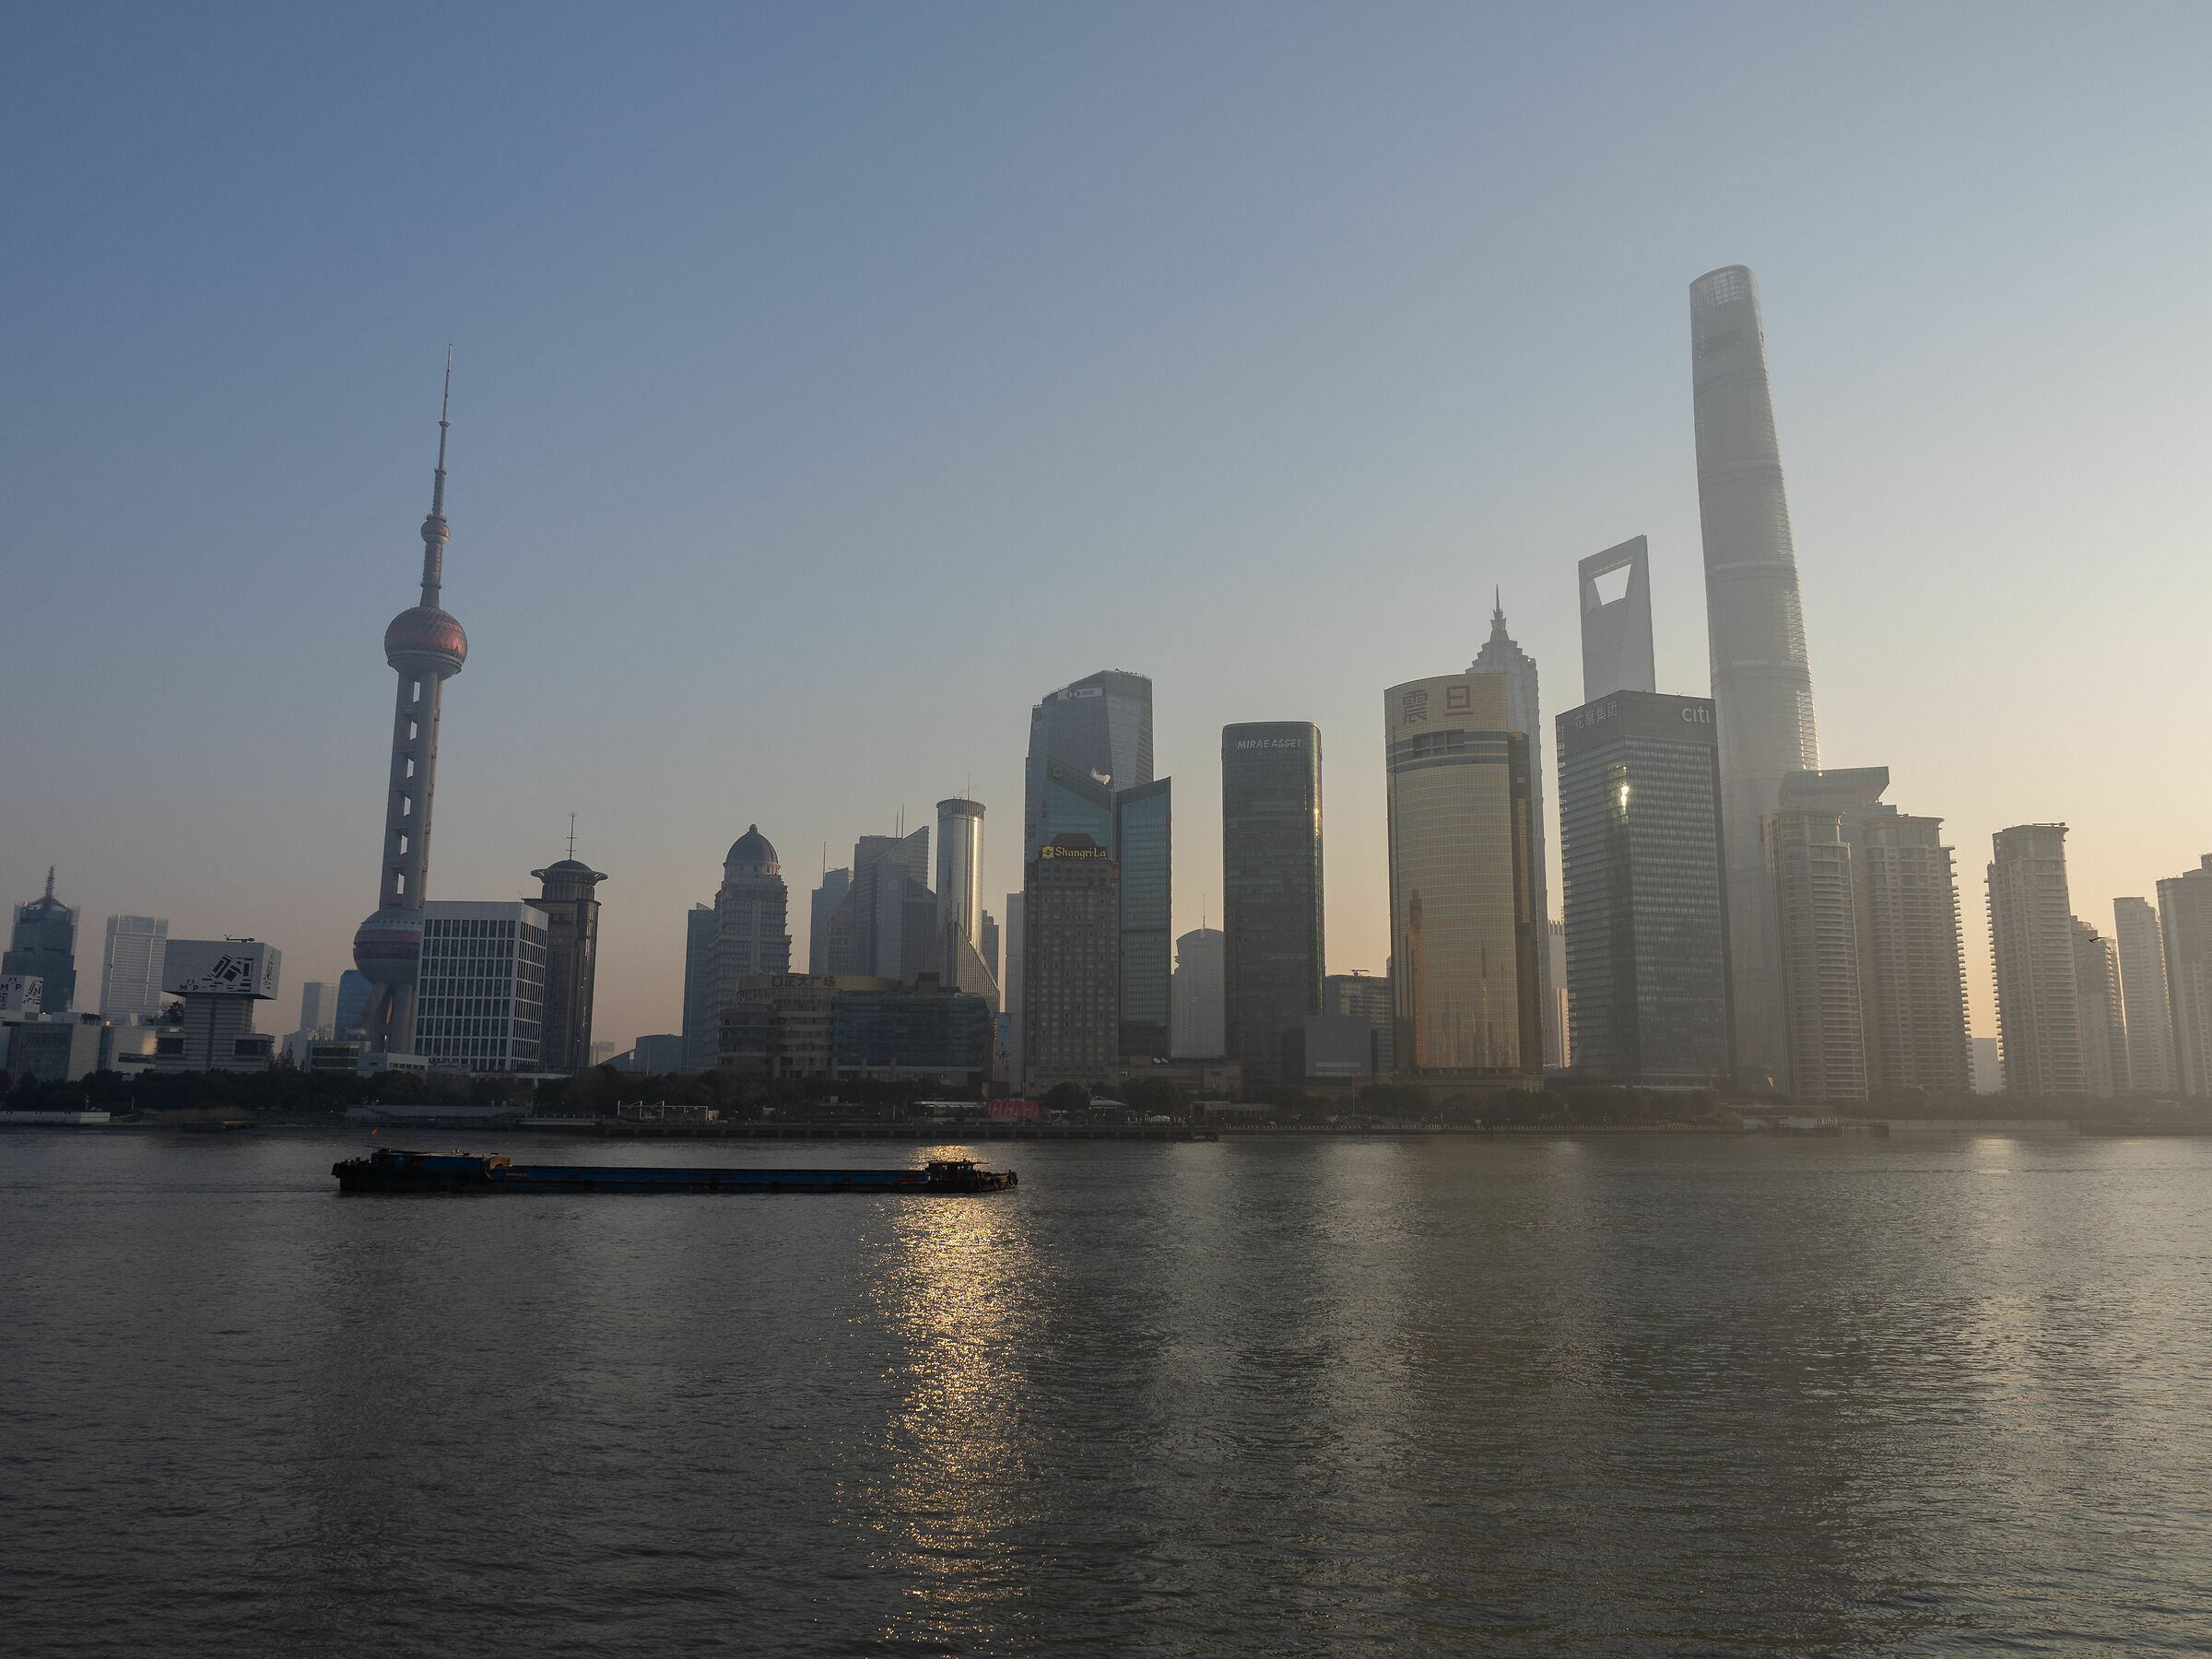 Sunrise over Pudong...